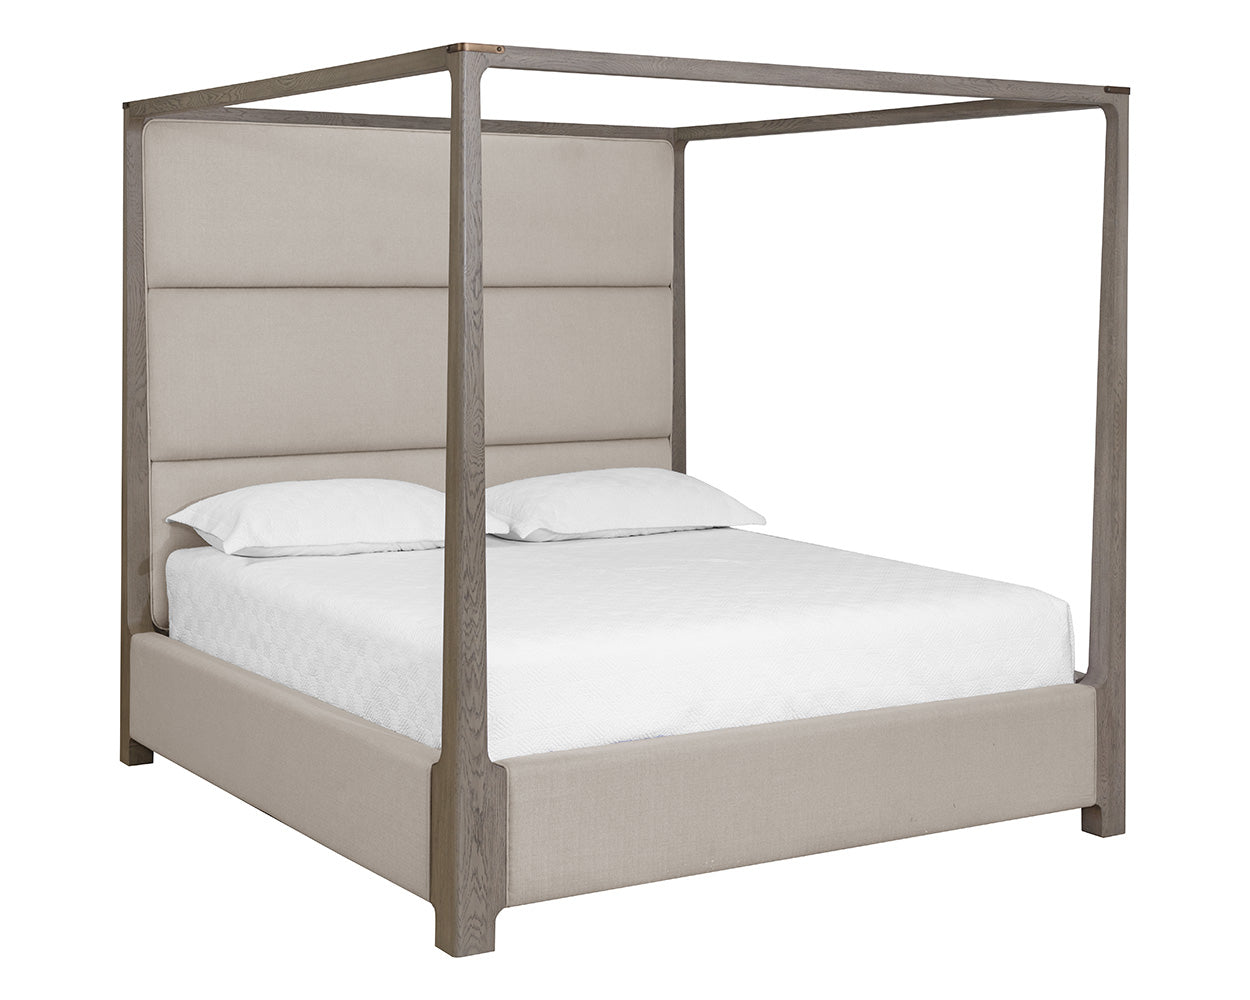 Danette Canopy Bed